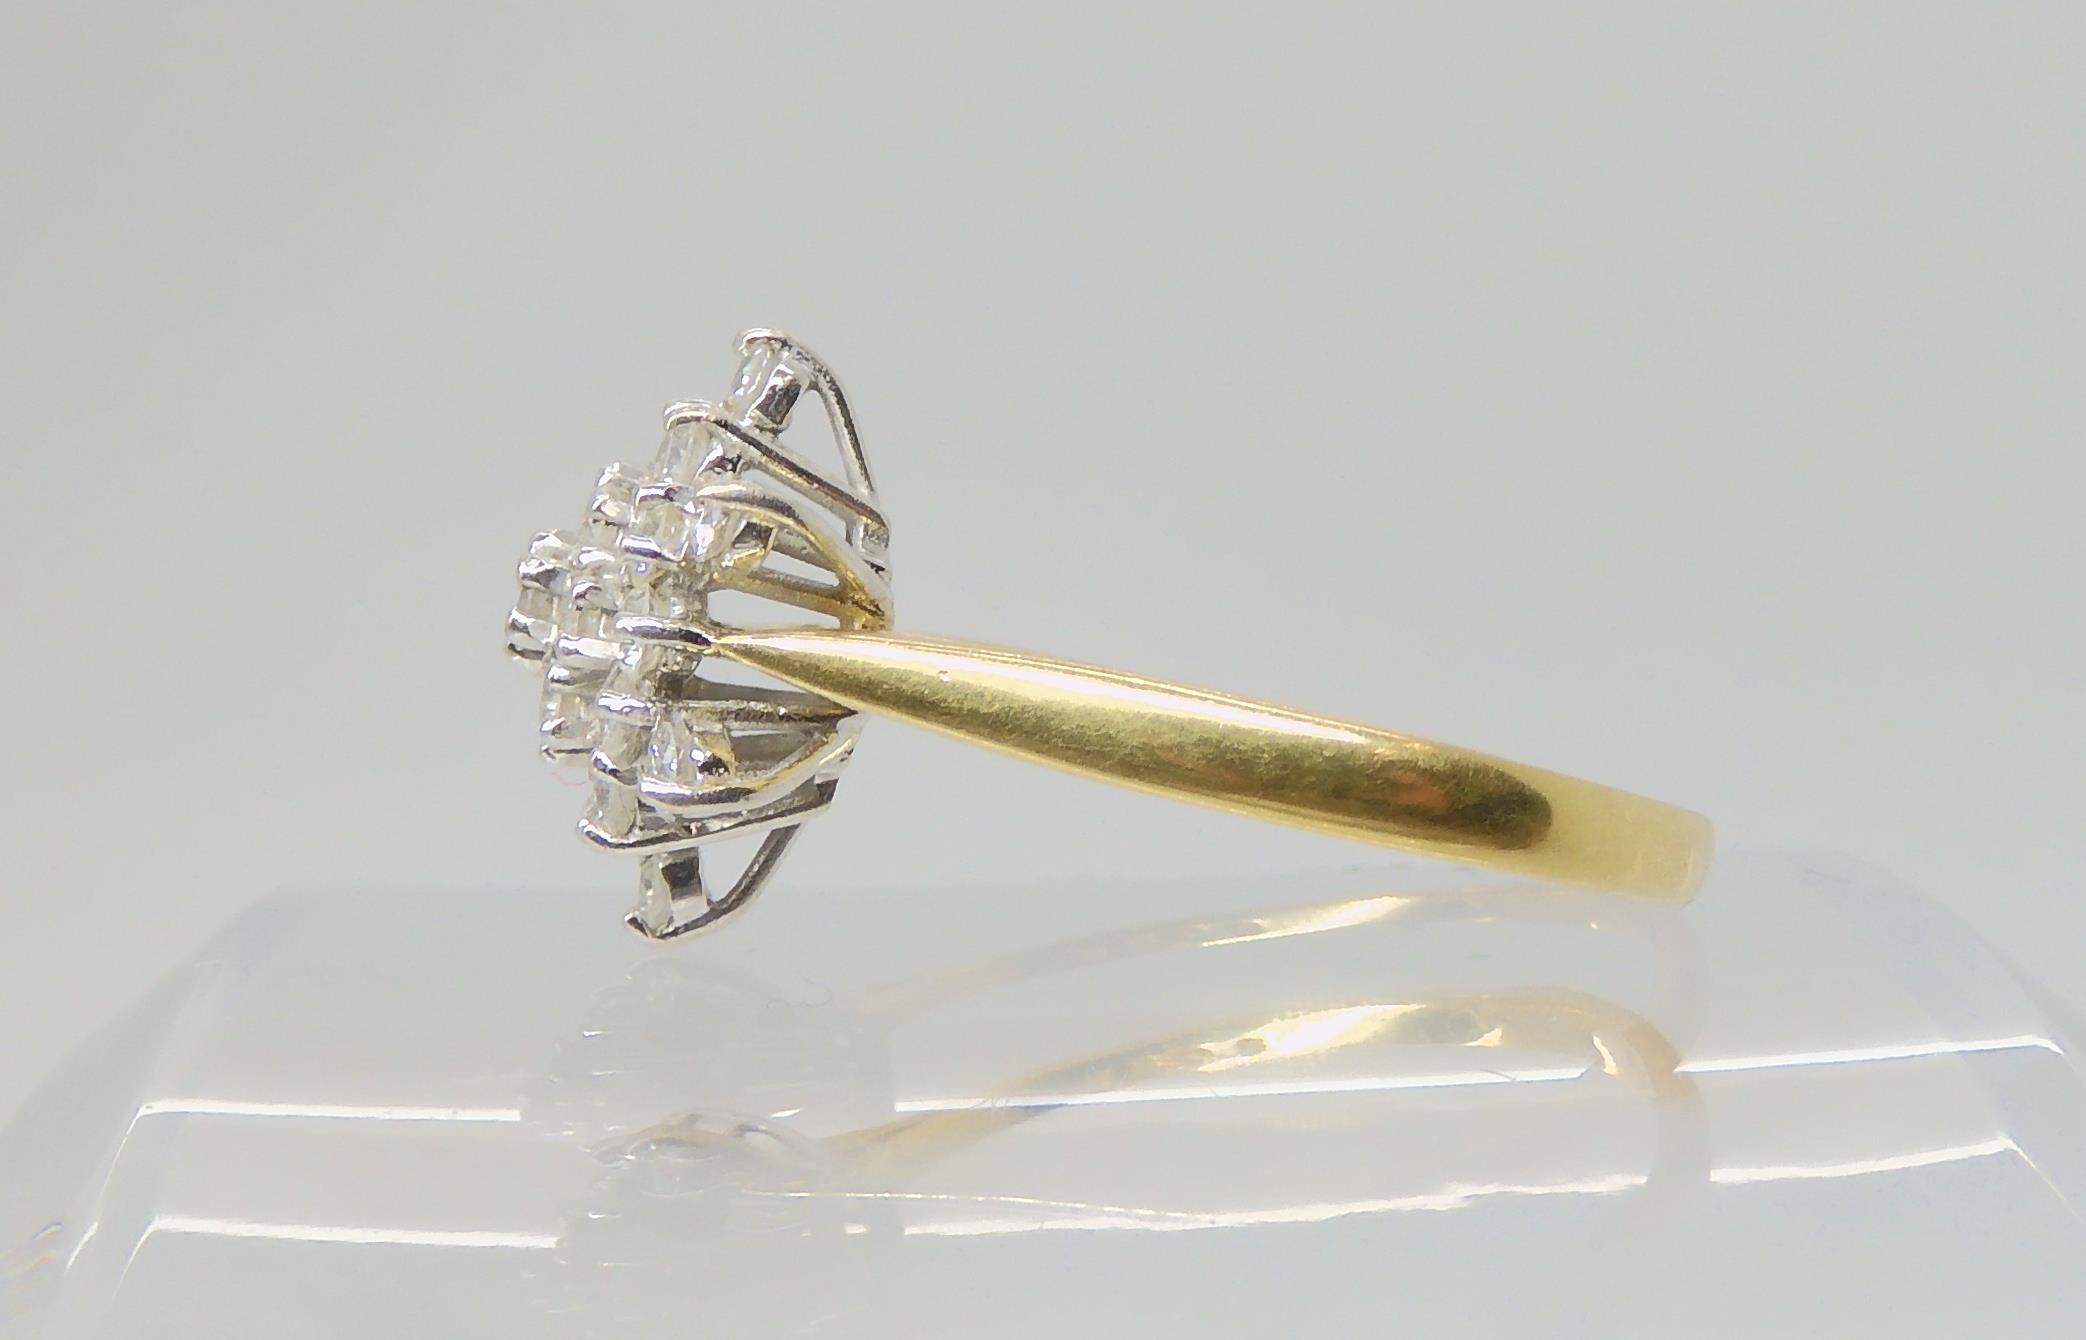 A DIAMOND SNOWFLAKE RING mounted throughout in 18ct yellow and white gold, set with estimated approx - Image 3 of 4